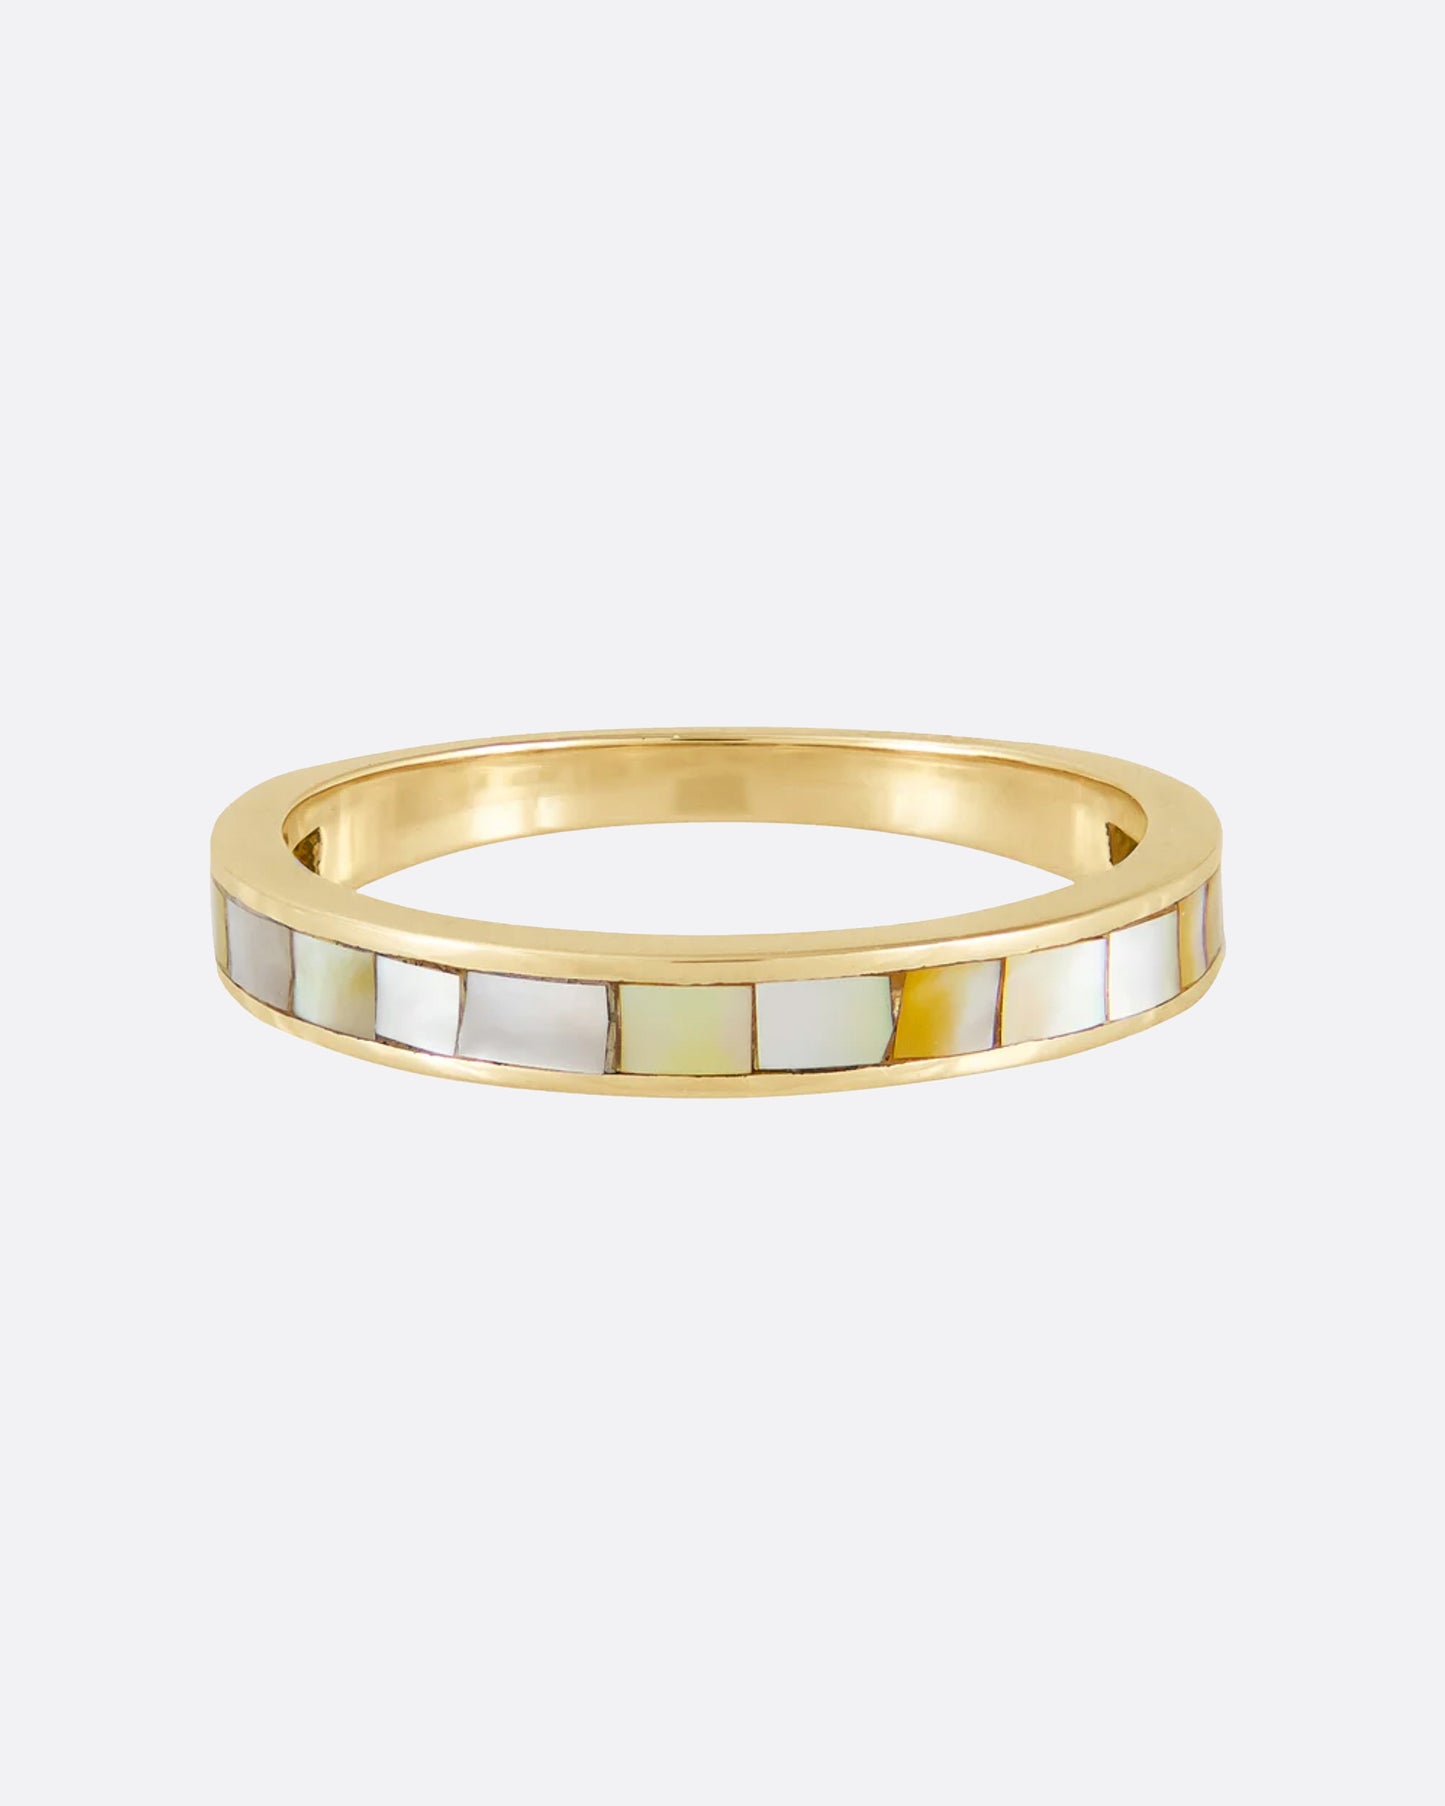 This ring looks like it's lined with a mosaic of iridescent tiles.